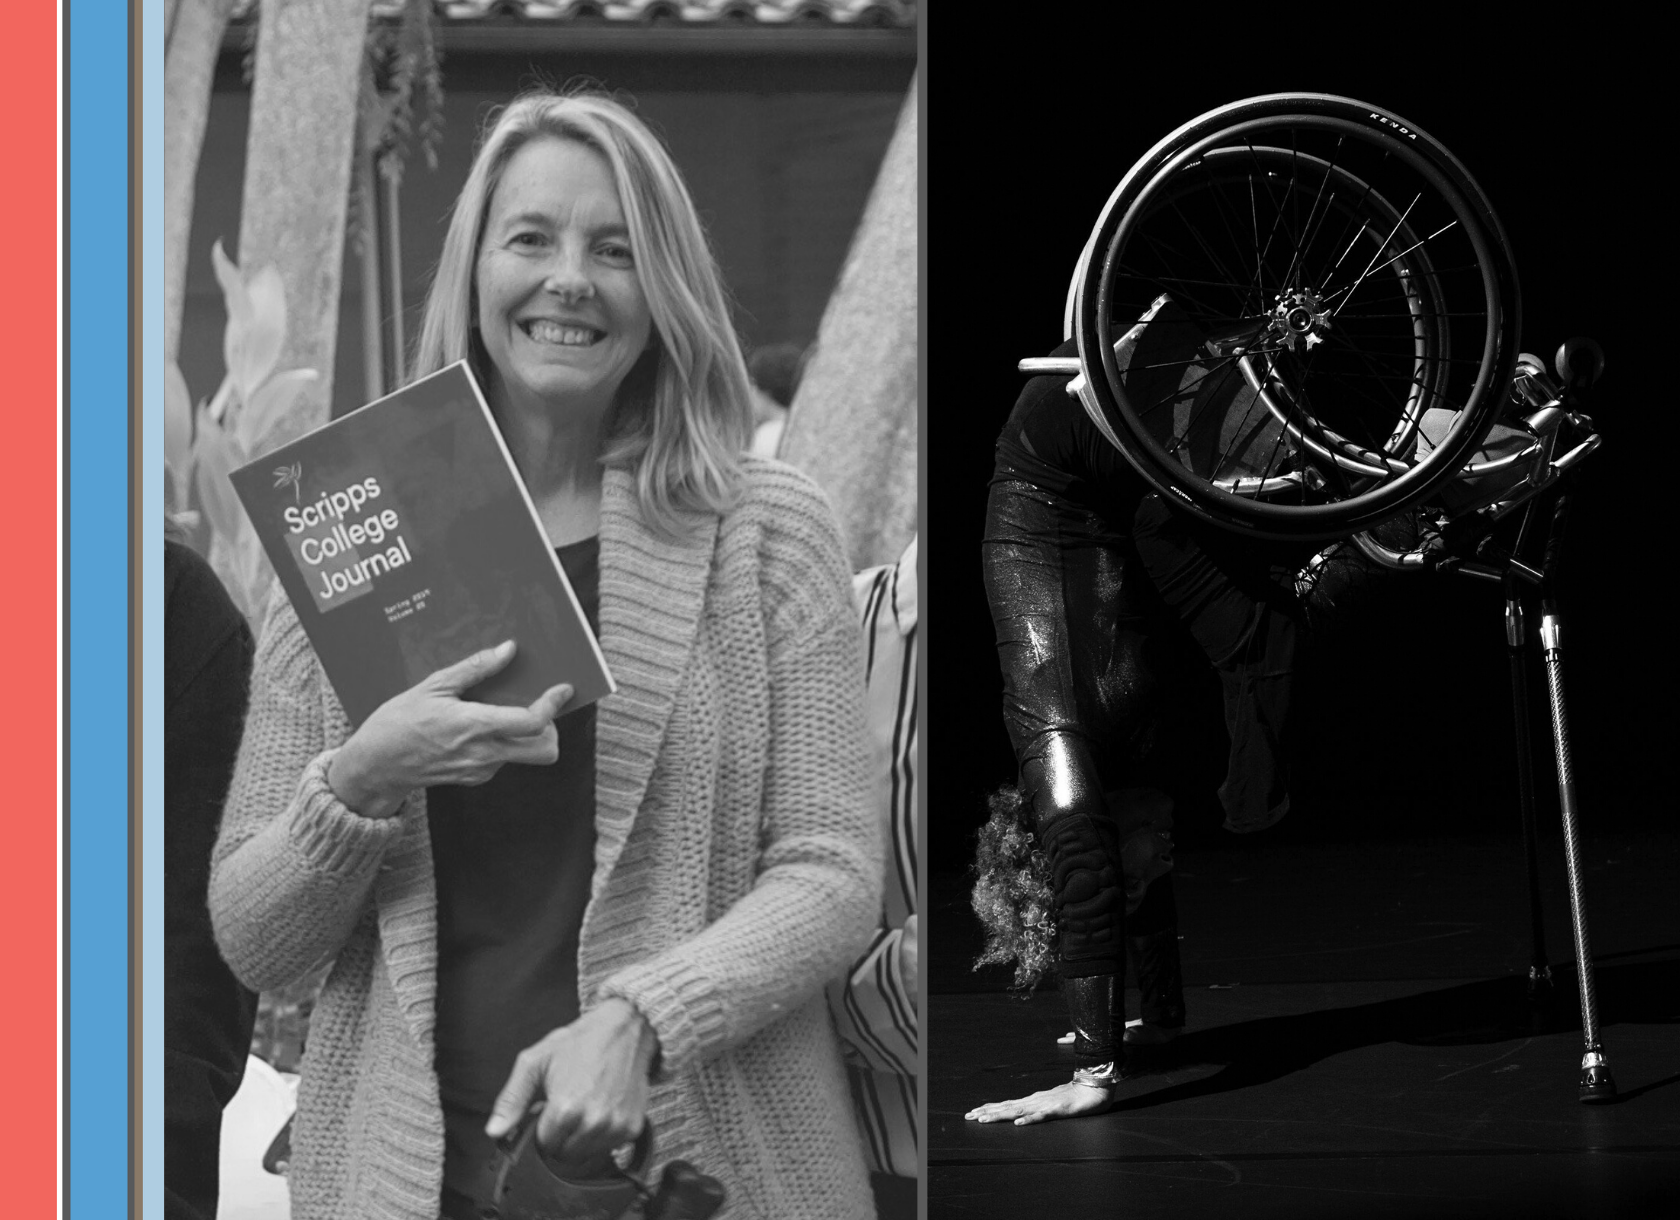 A black and white photo of a smiling white woman wearing a long cardigan and holding up a magazine, next to a black and white photo of a person in a wheelchair doing a handstand. next to a 